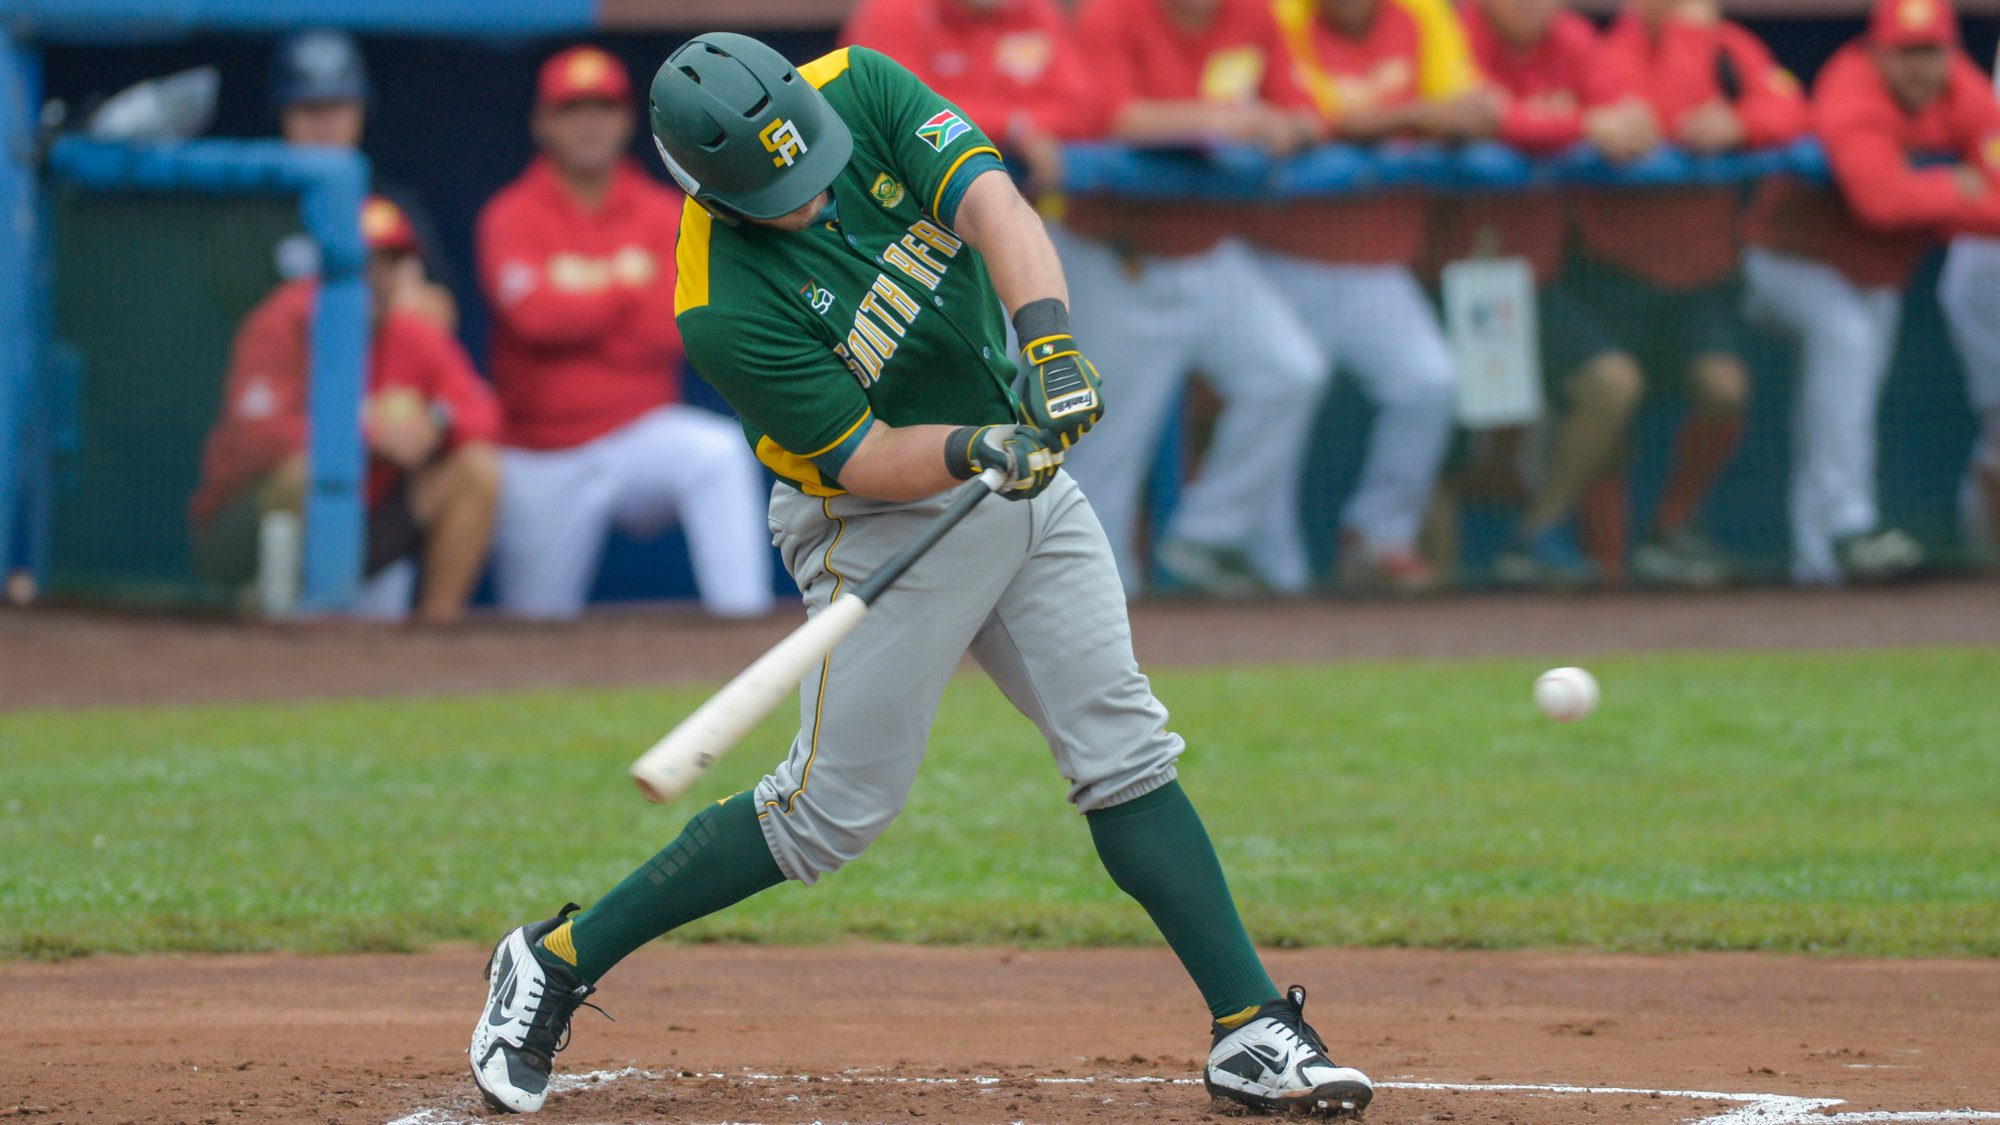 South Africa's progress is now on a knife-edge ©WBSC